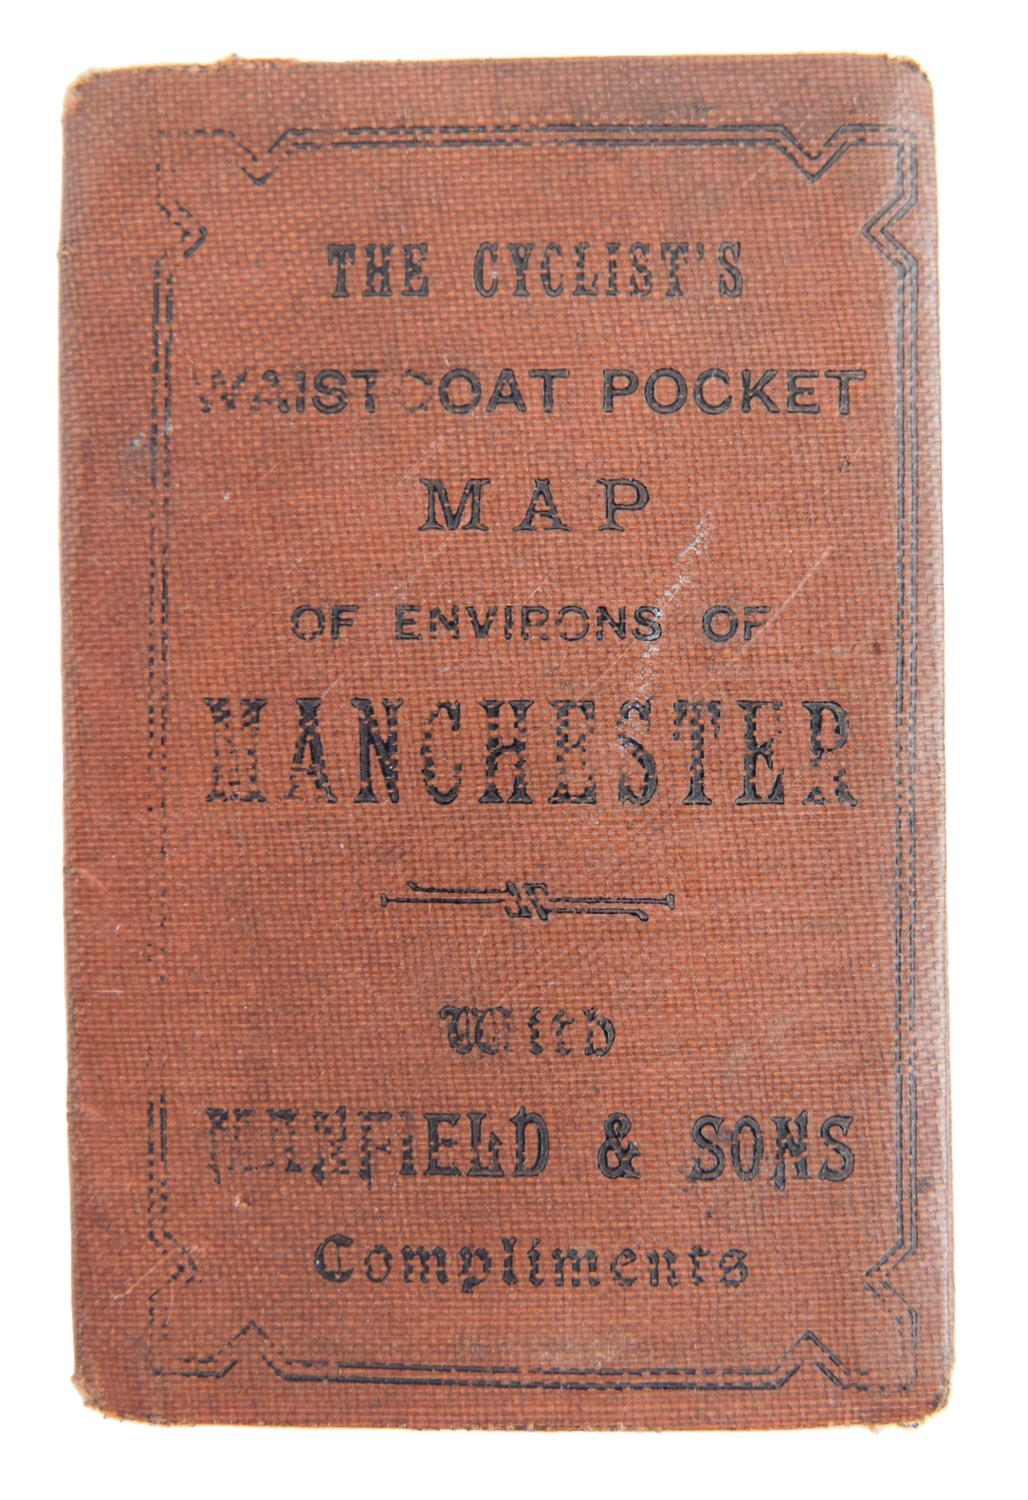 Manfield & Sons, Manchester Manufacturers of Cycling Shoes.   An advertising pocket cycling map of